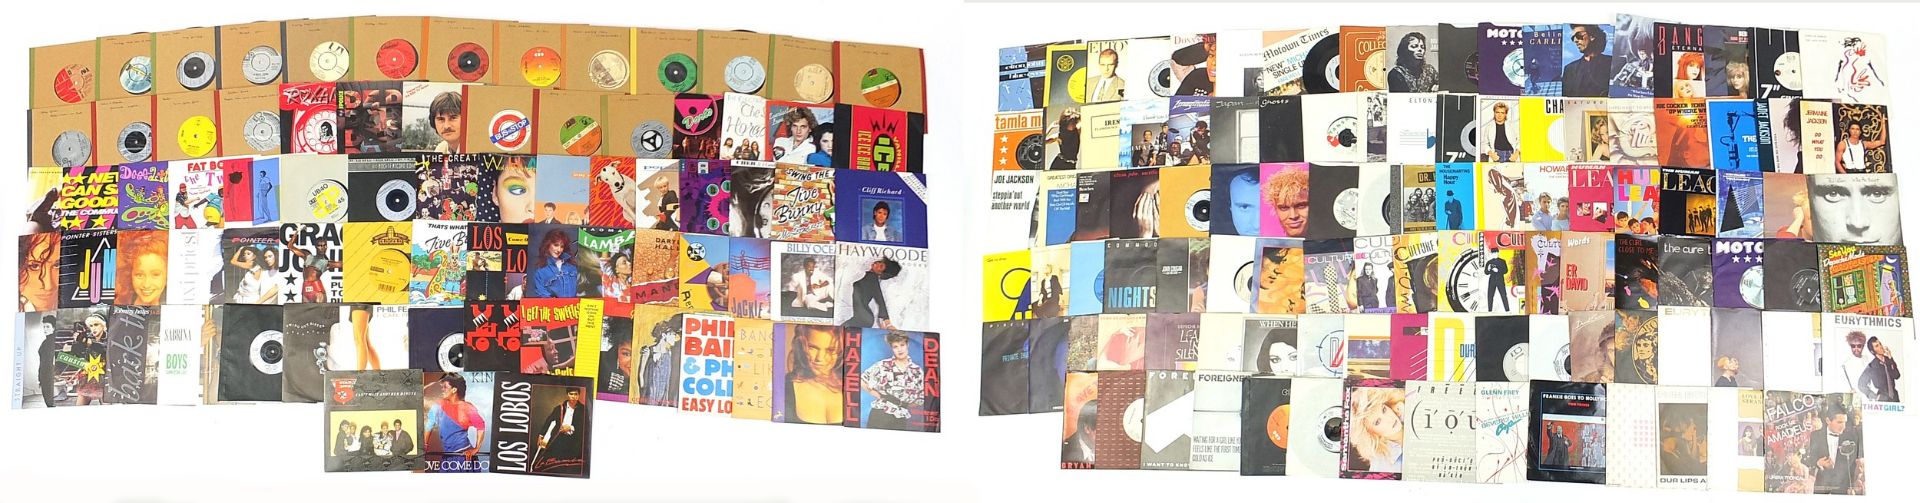 Collection of 45rpm records including Roxanne, The Electric Light Orchestra, Depeche Mode and